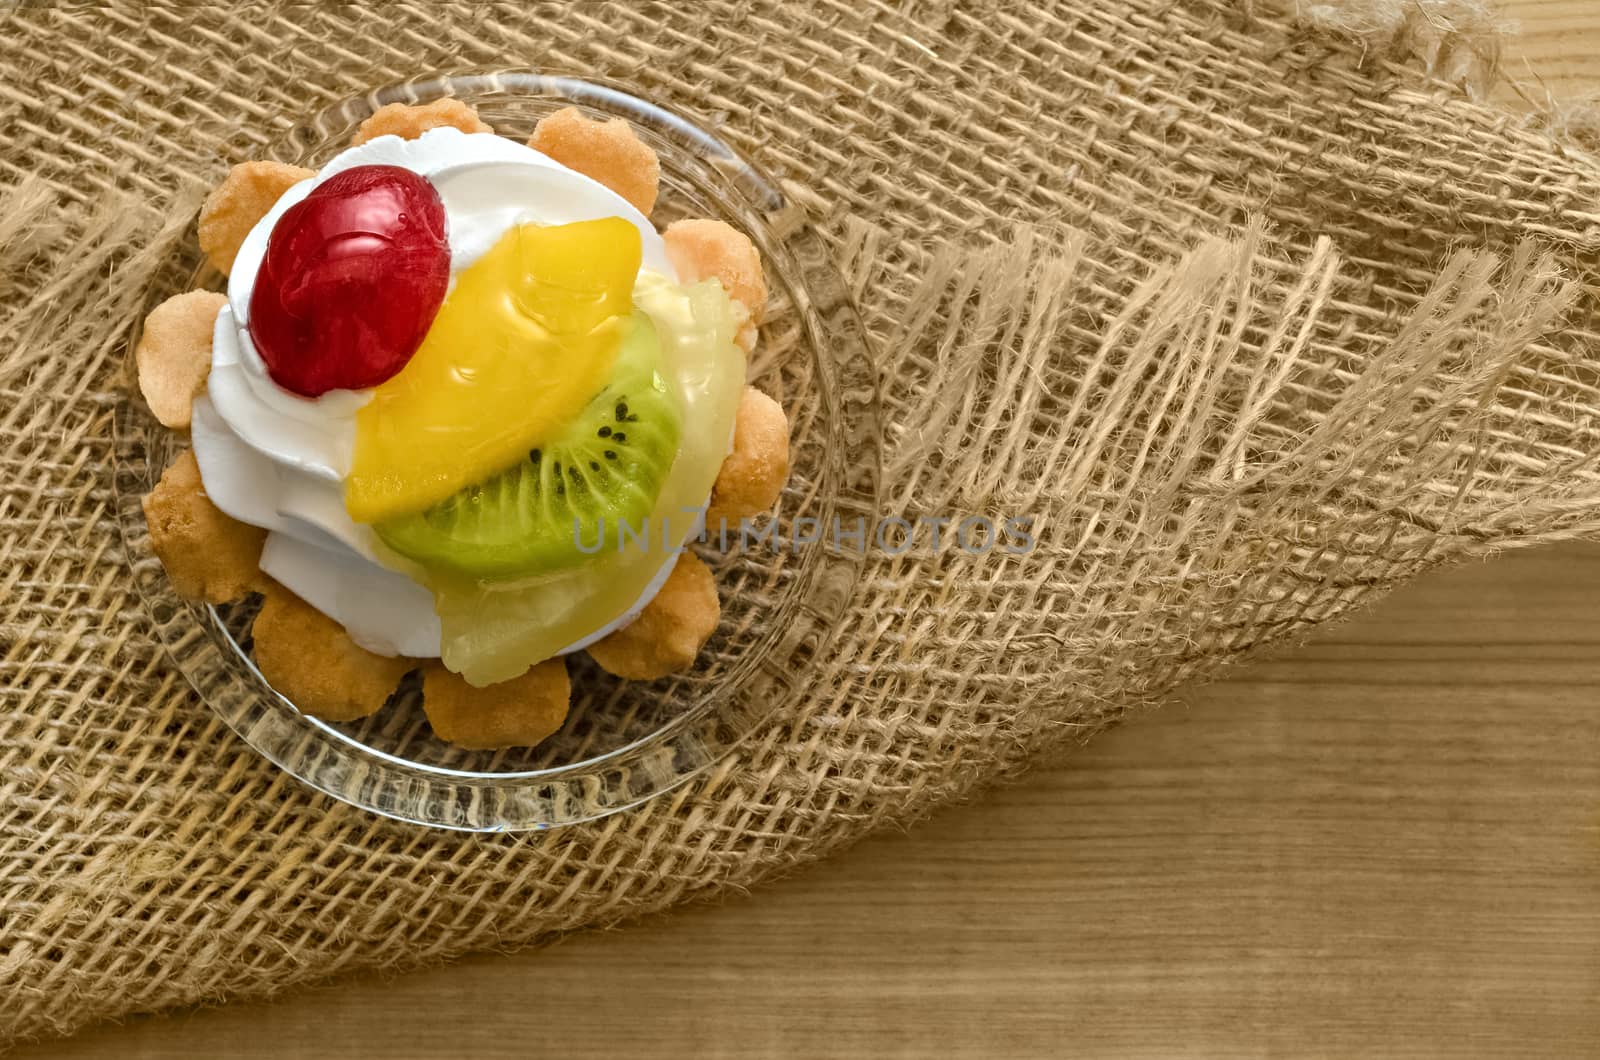 Cake with fruits and cream, on wooden table and burlap